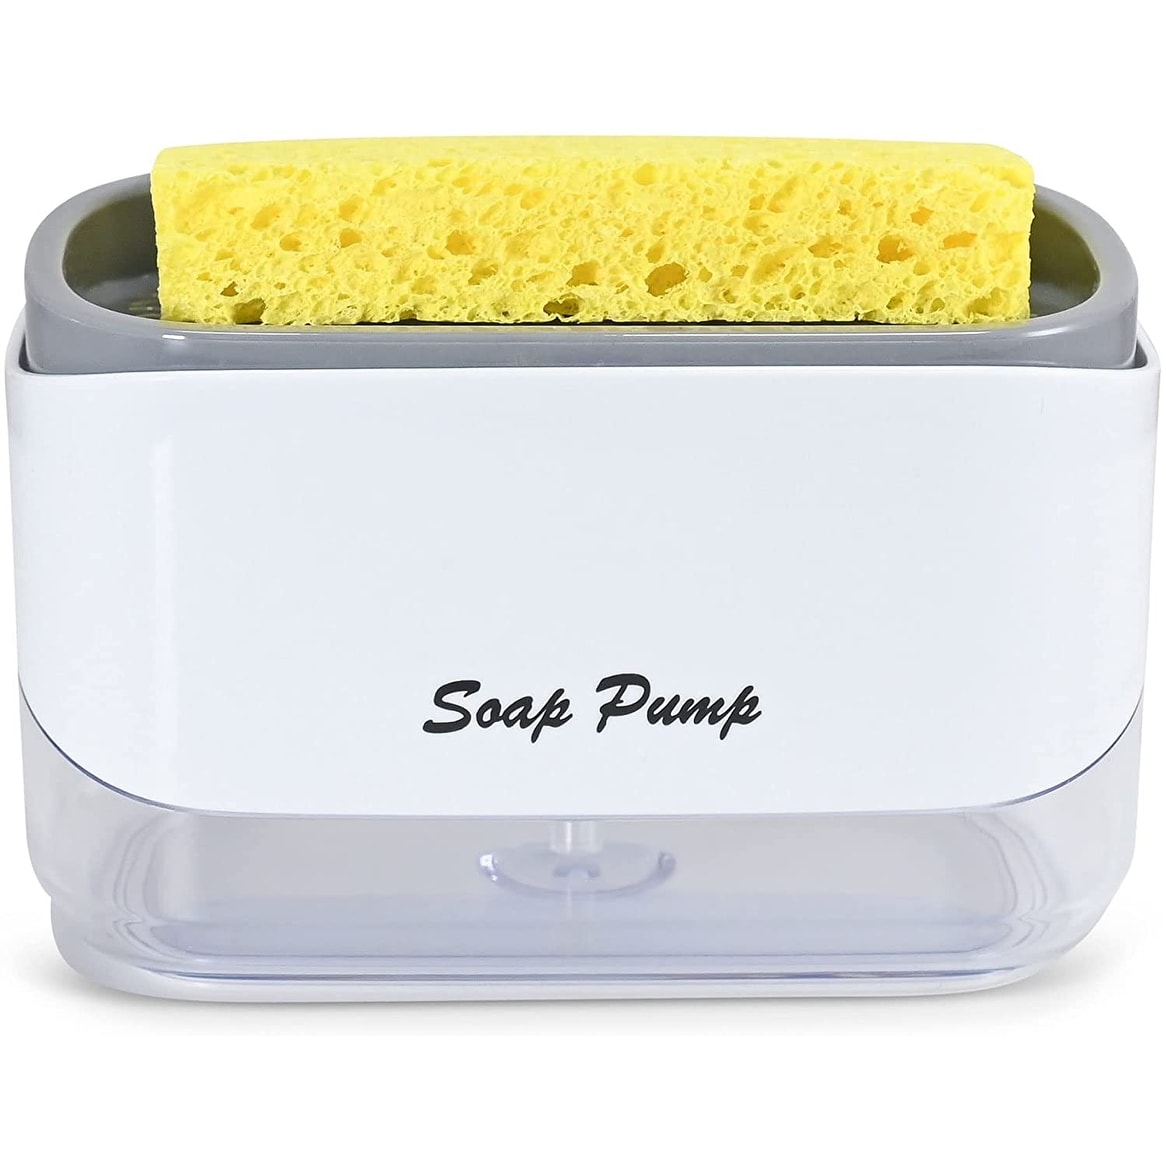 https://ak1.ostkcdn.com/images/products/is/images/direct/0078a07e112e85b7277a9ffcf9a0348739df5732/Cheer-Collection-Dish-Soap-Dispenser-and-Sponge-Holder.jpg